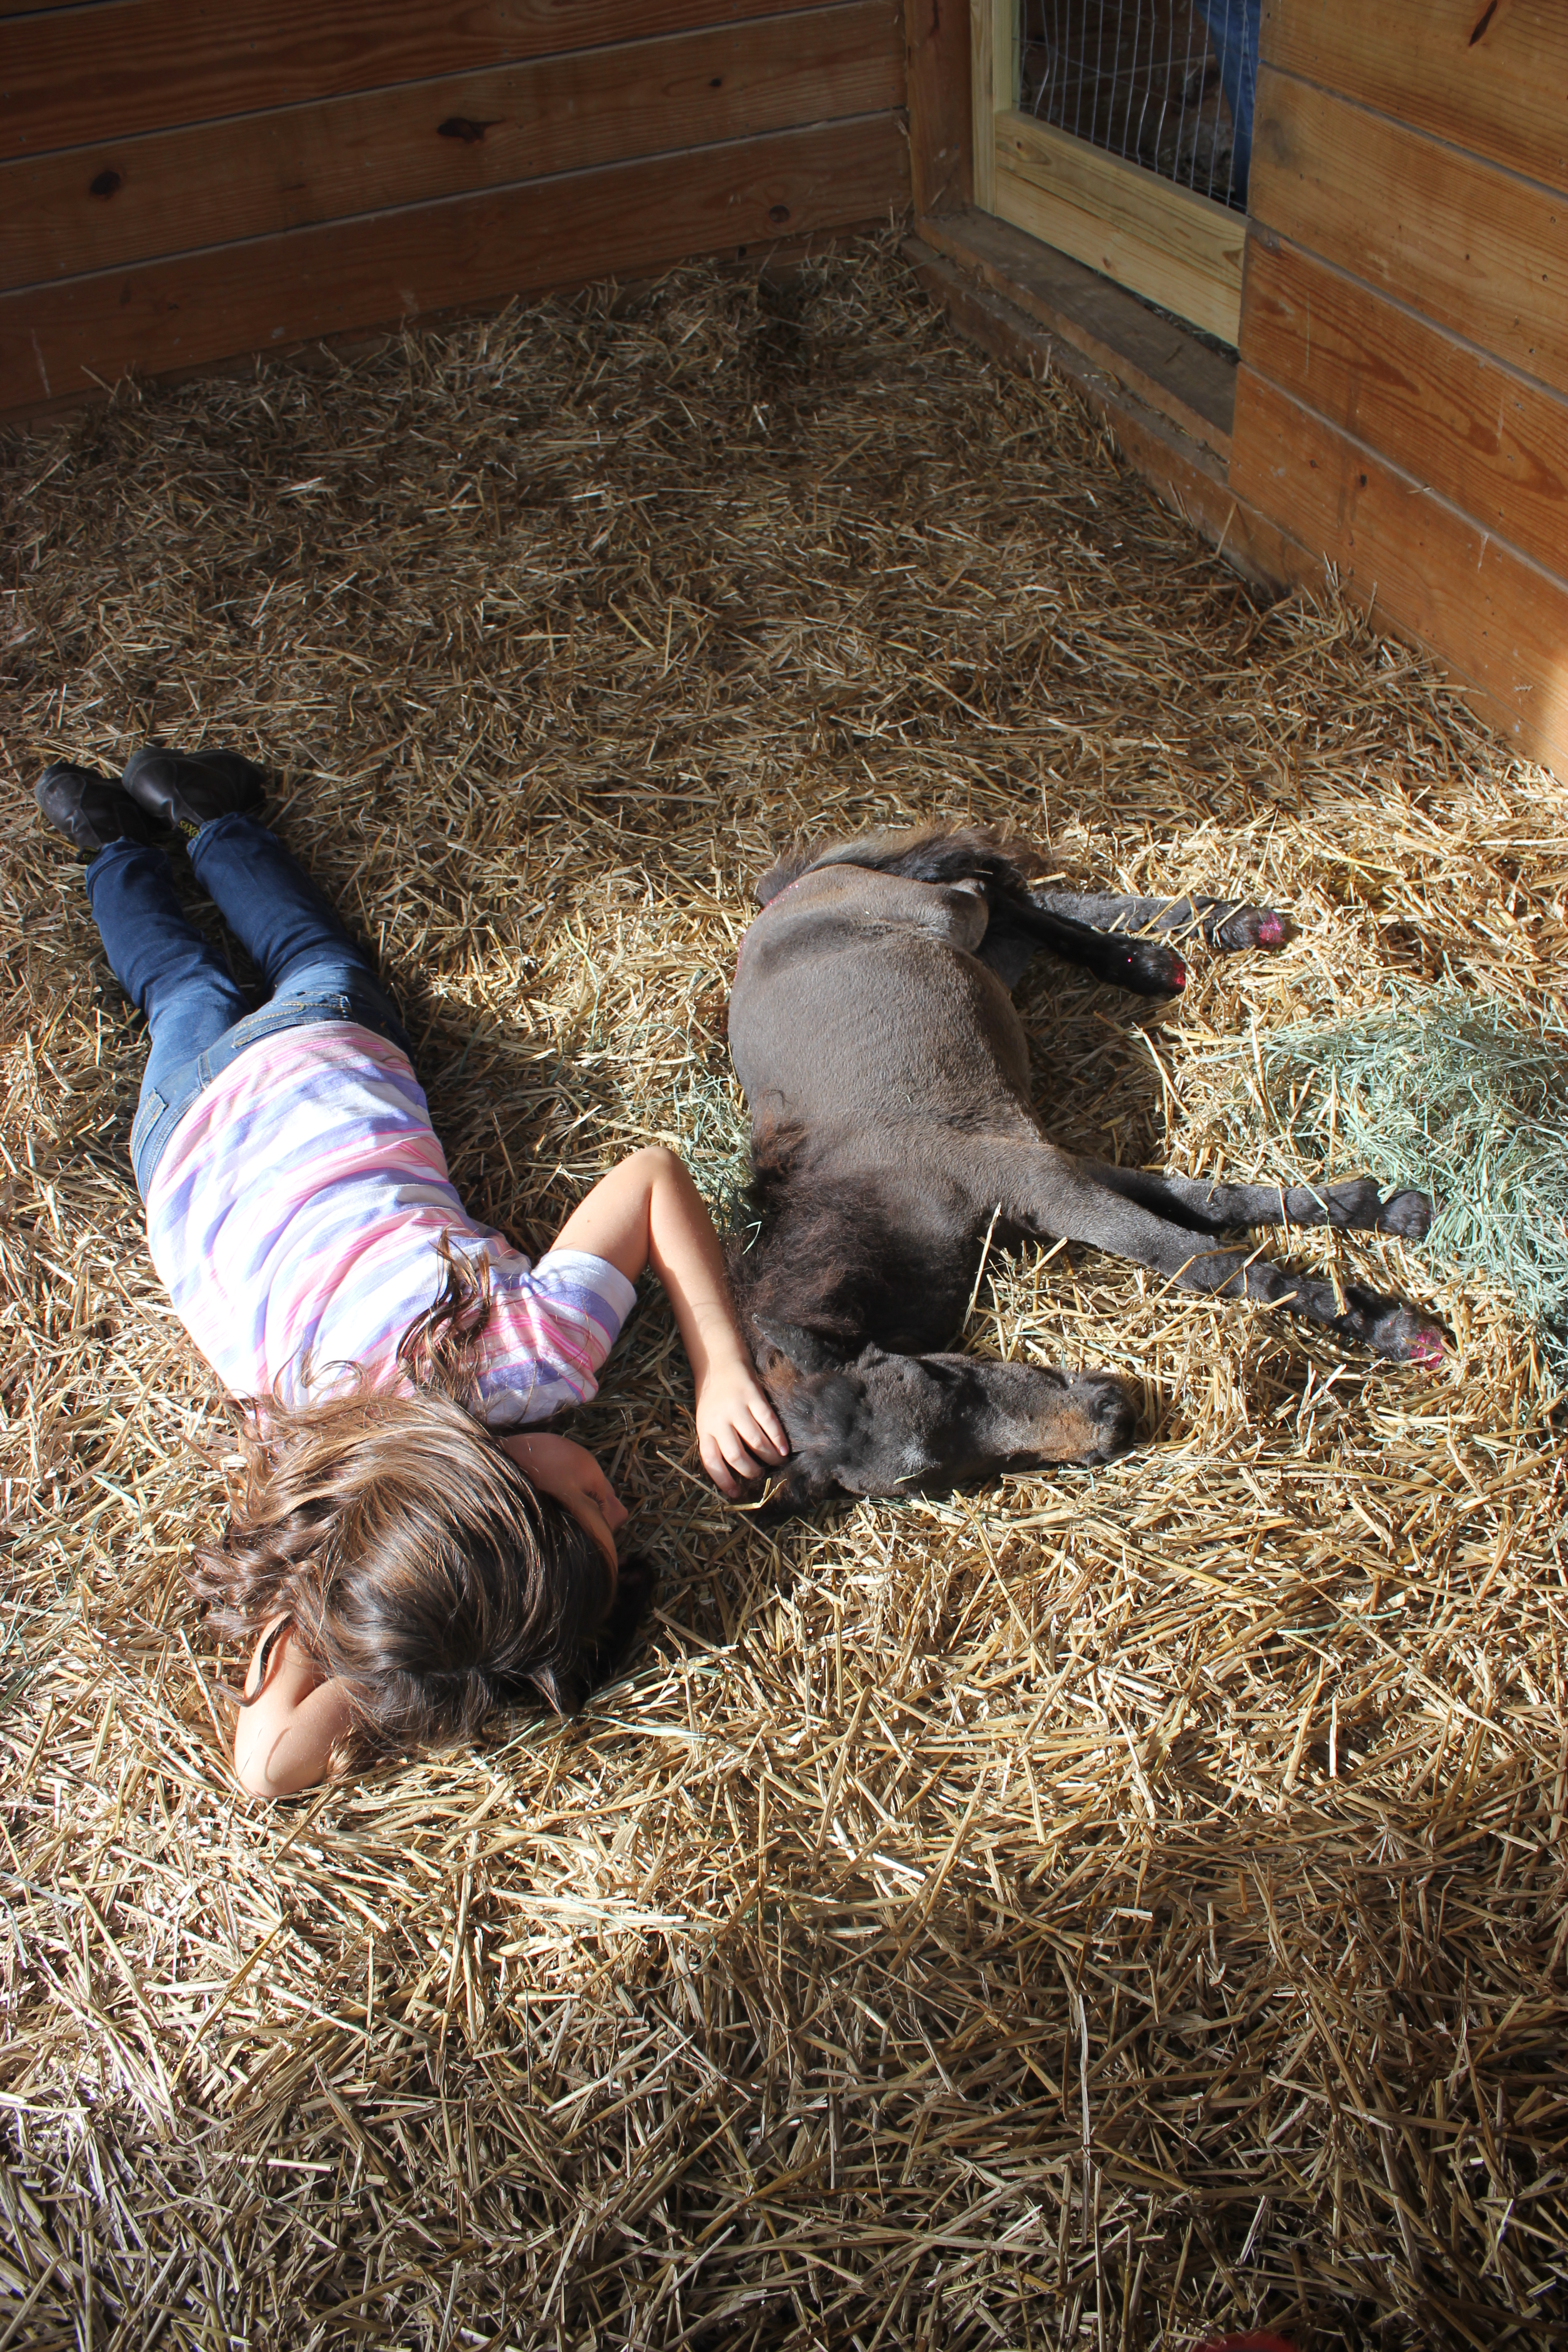 A blind Orphaned Miniature Filly is saved and given a new Future when everything before her had seemed so bleak